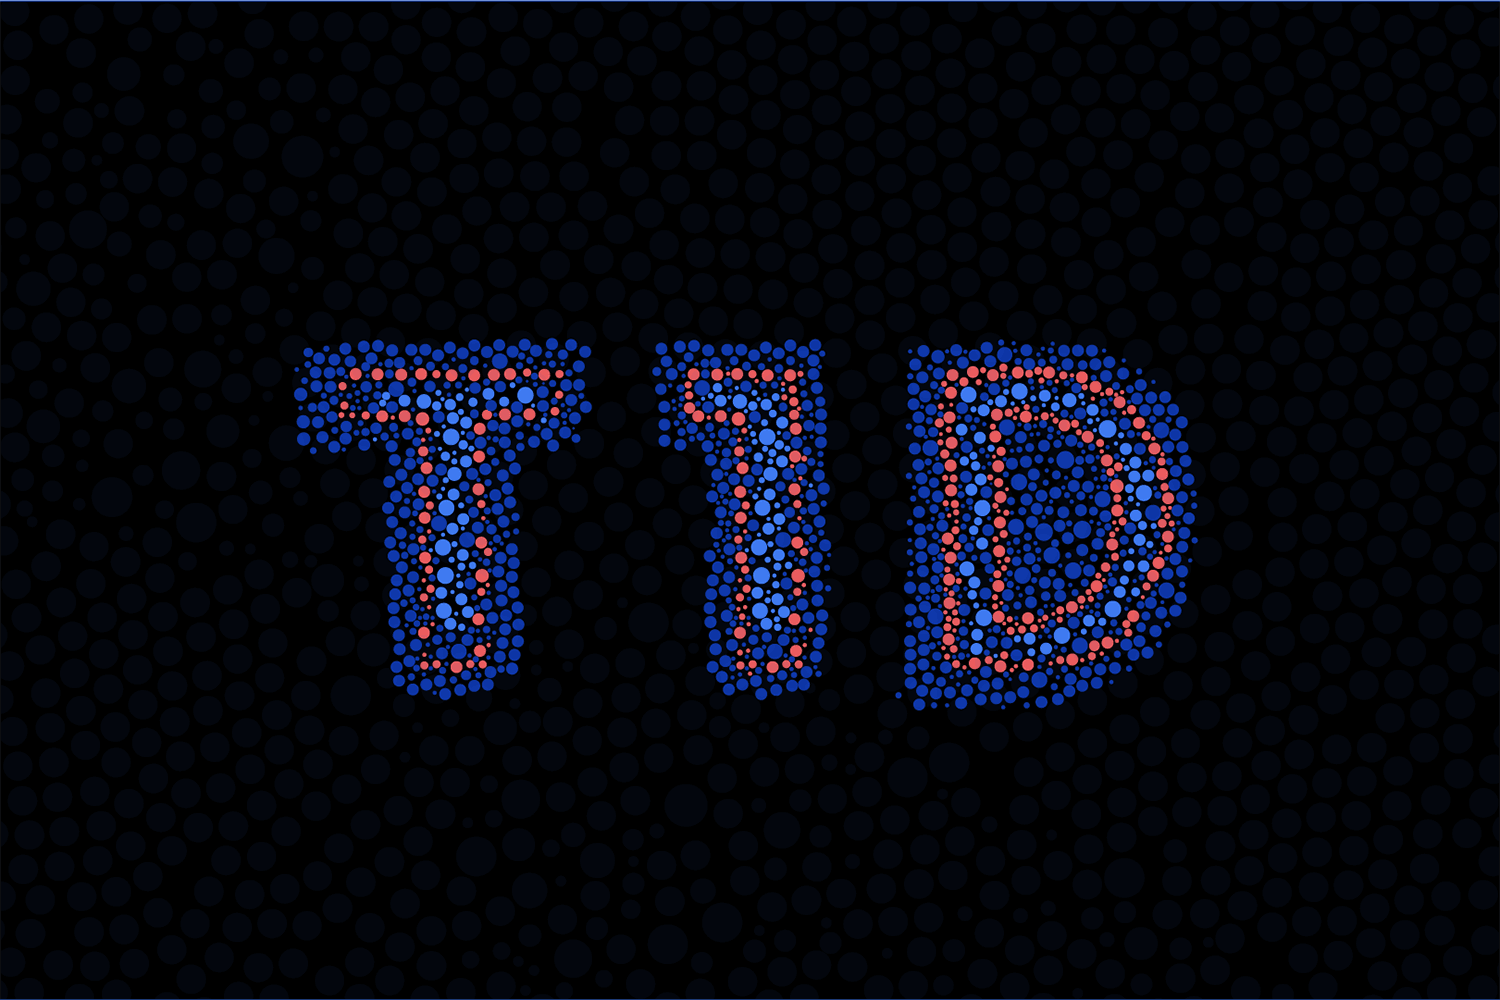 IBM and JDRF provided insights into development of biomarkers associated with risk of T1D onset in young children.